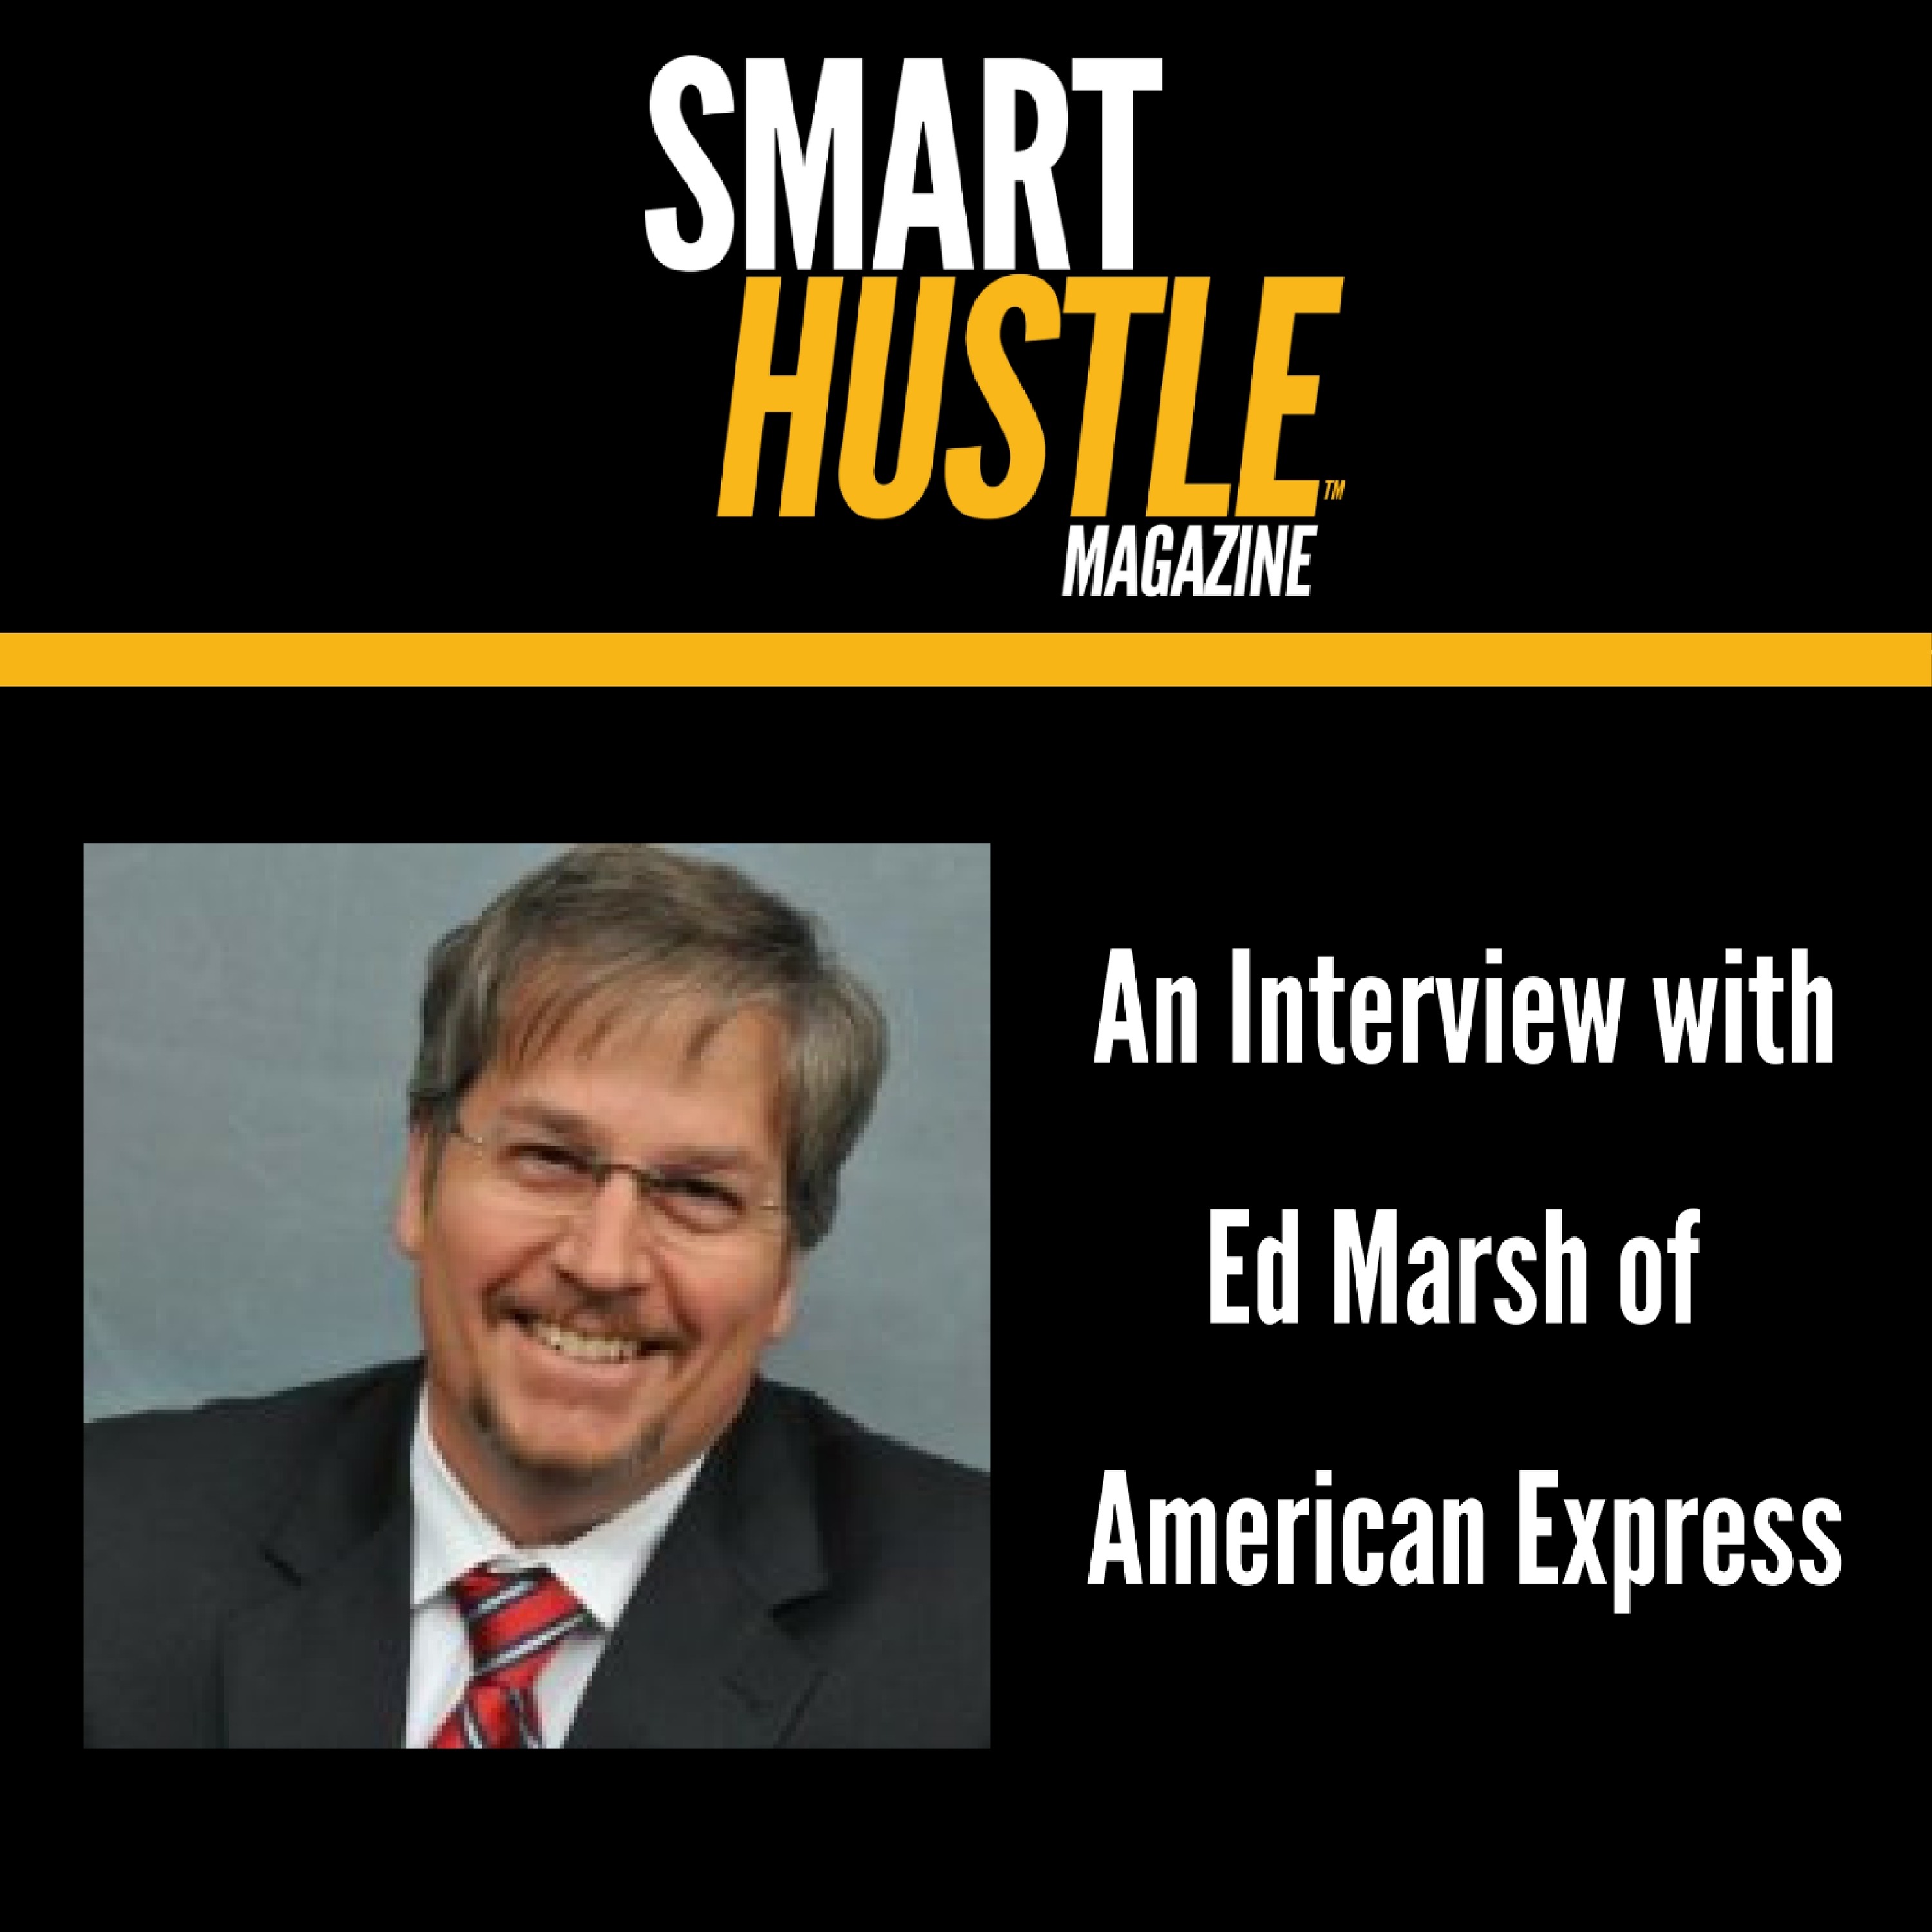 Ed Marsh from American Express: 3 Myths About Exporting You Need to Know